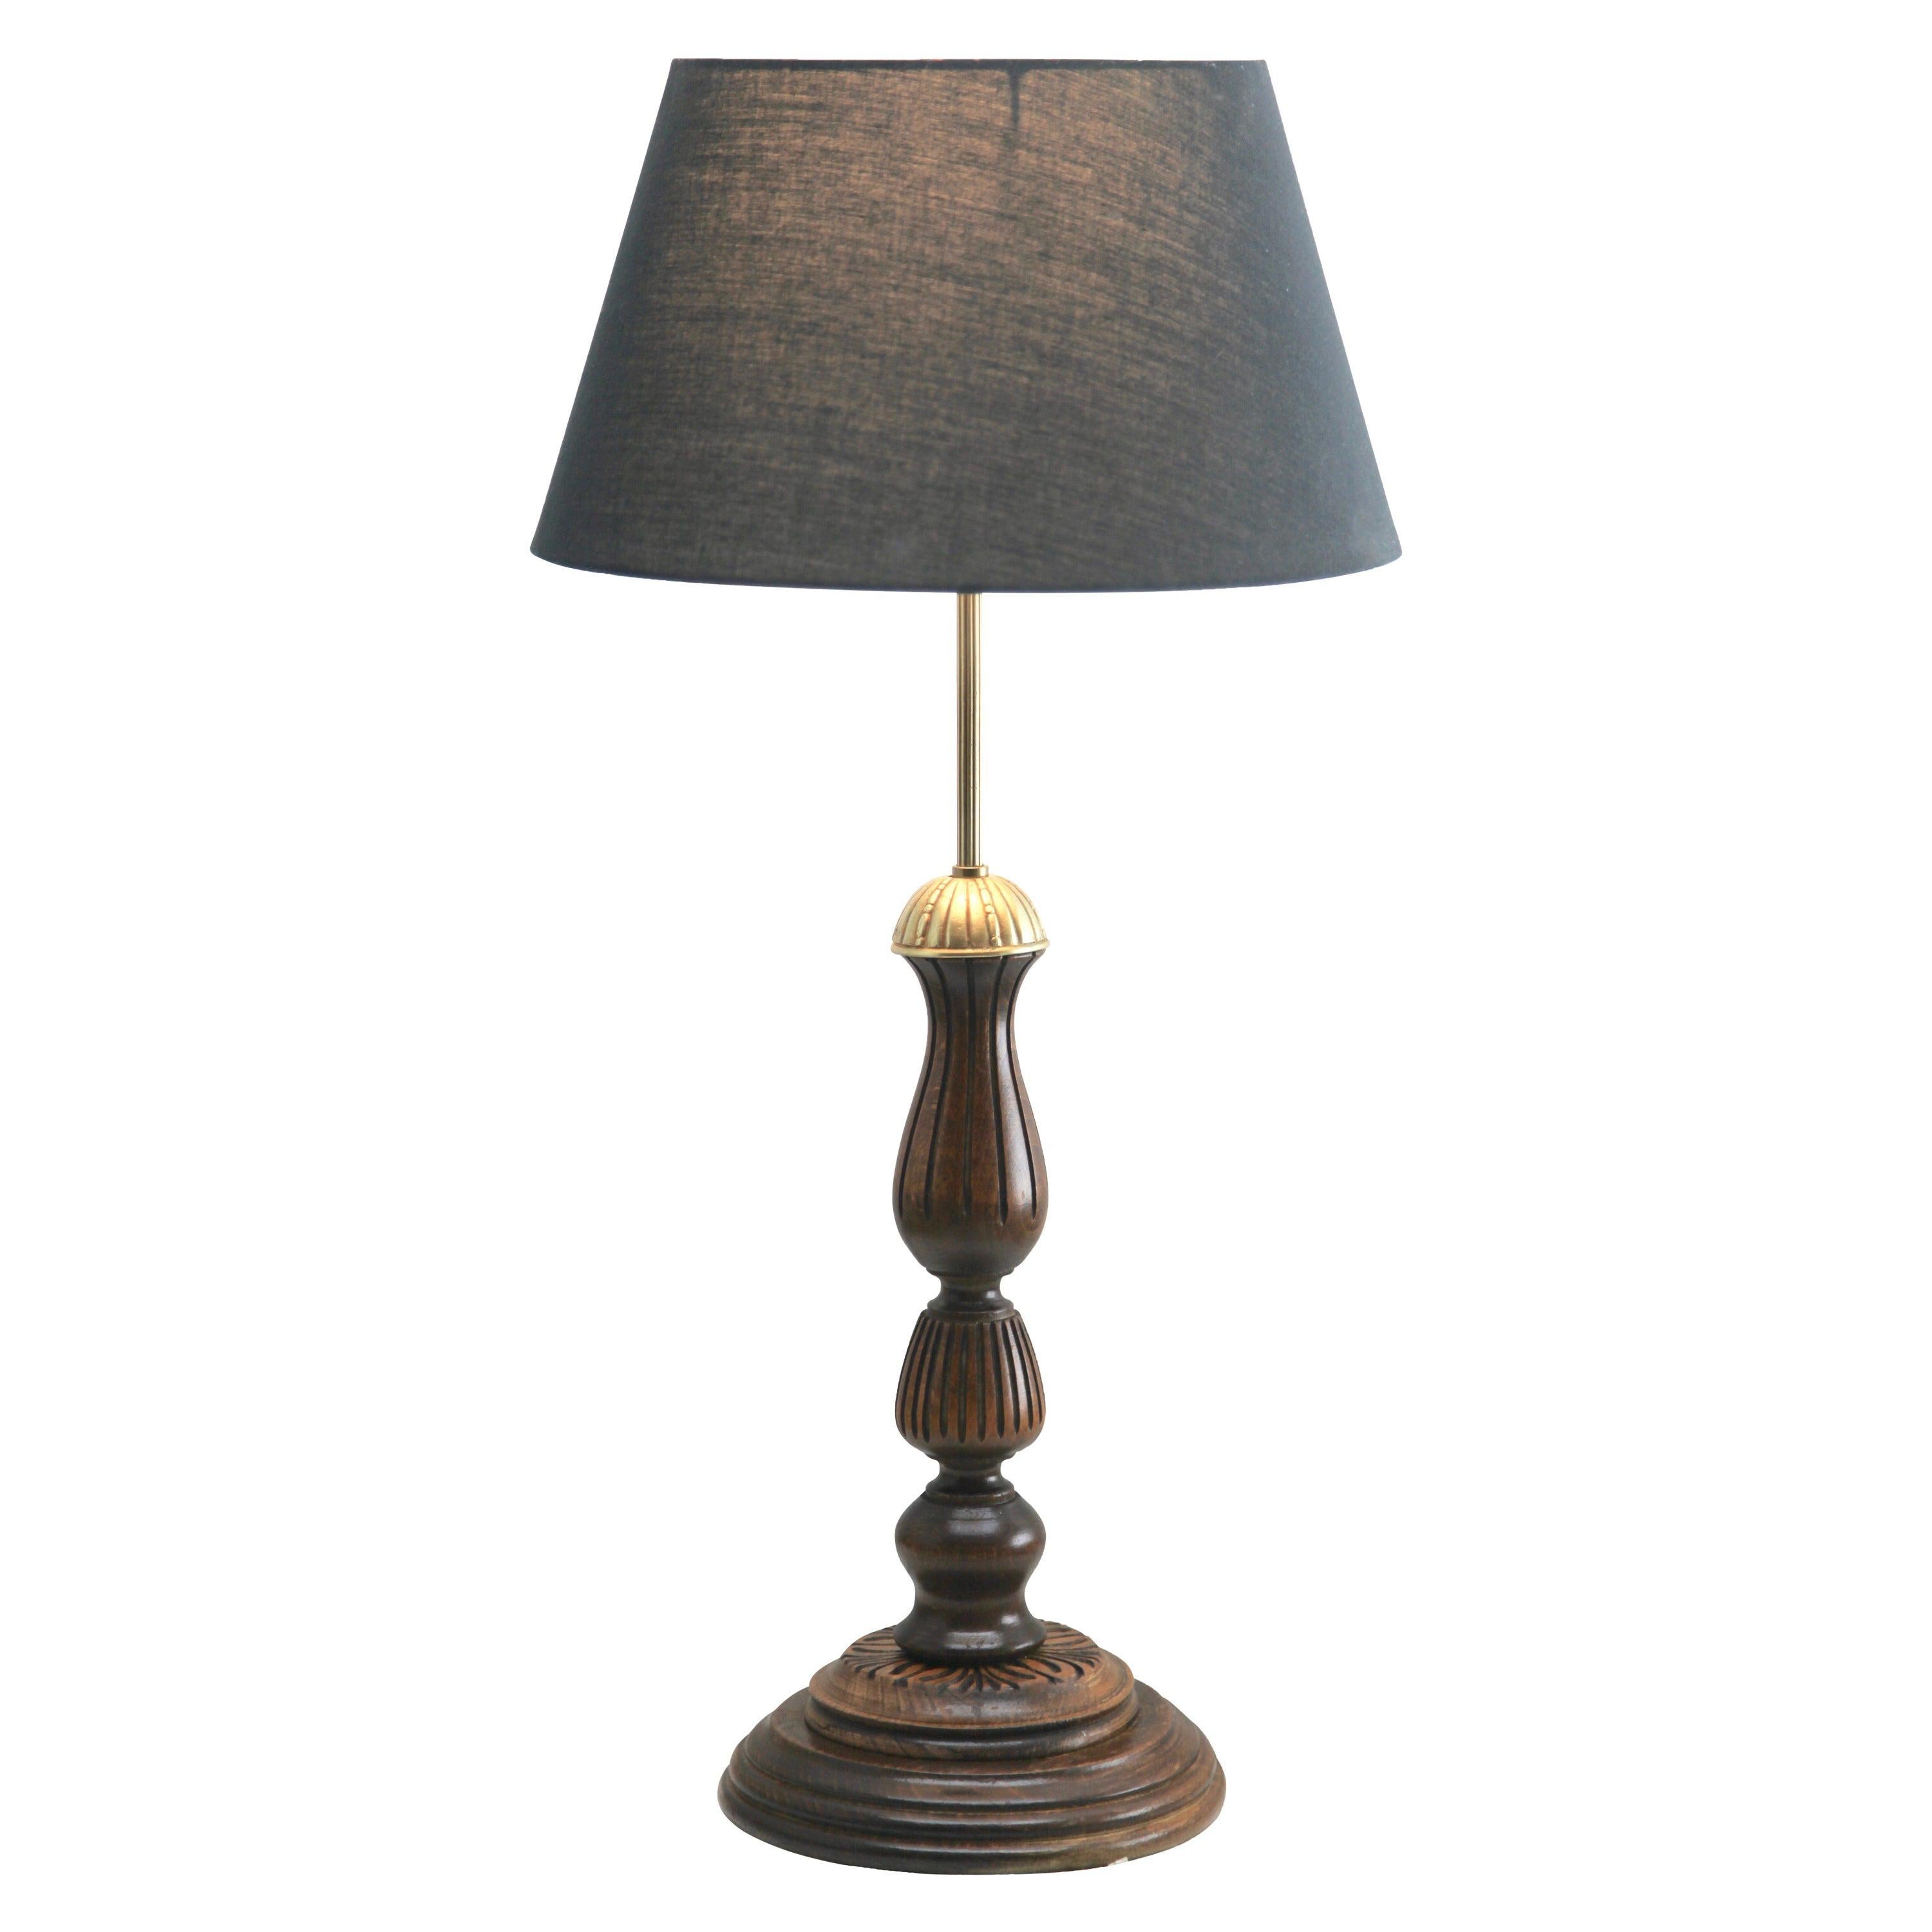 Assembled 20th Century Turned Wooden Lamp